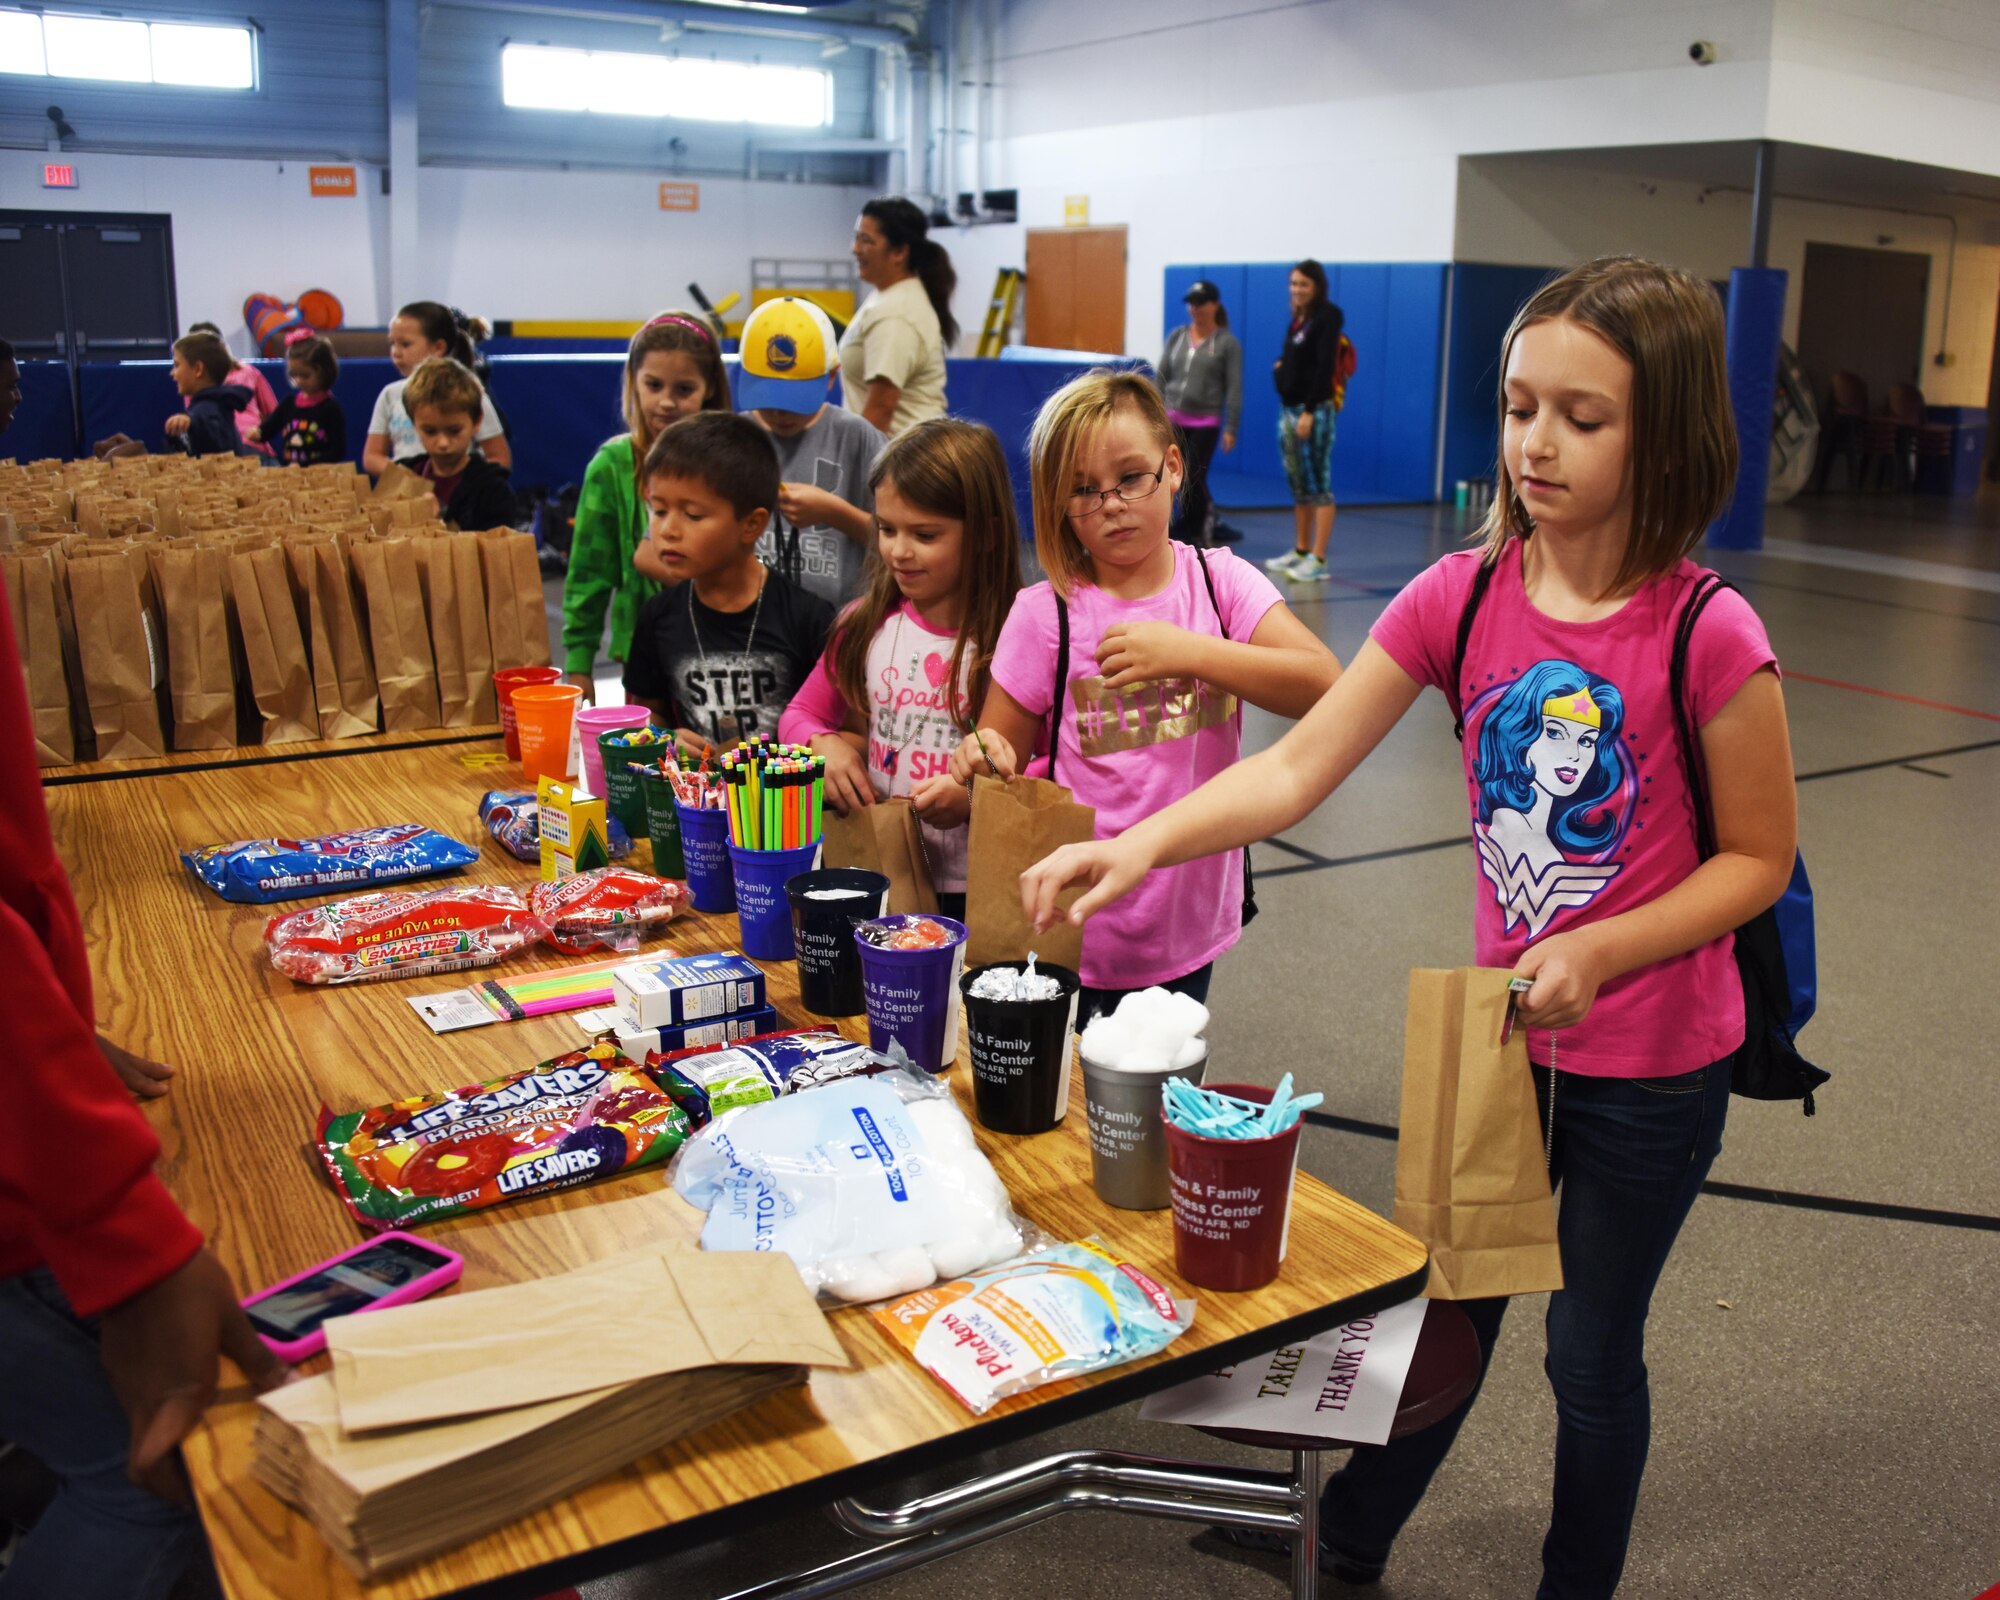 Children from across the base gather goodies for their deployment bag during a kid’s deployment day event Sept. 29, 2017, at Grand Forks Air Force Base, North Dakota. The deployment day was sponsored by the Network 5/6 whose goal was to give the kids a feel for what a deployment is like. (U.S. Air Force photo/Senior Airman Cierra Presentado)